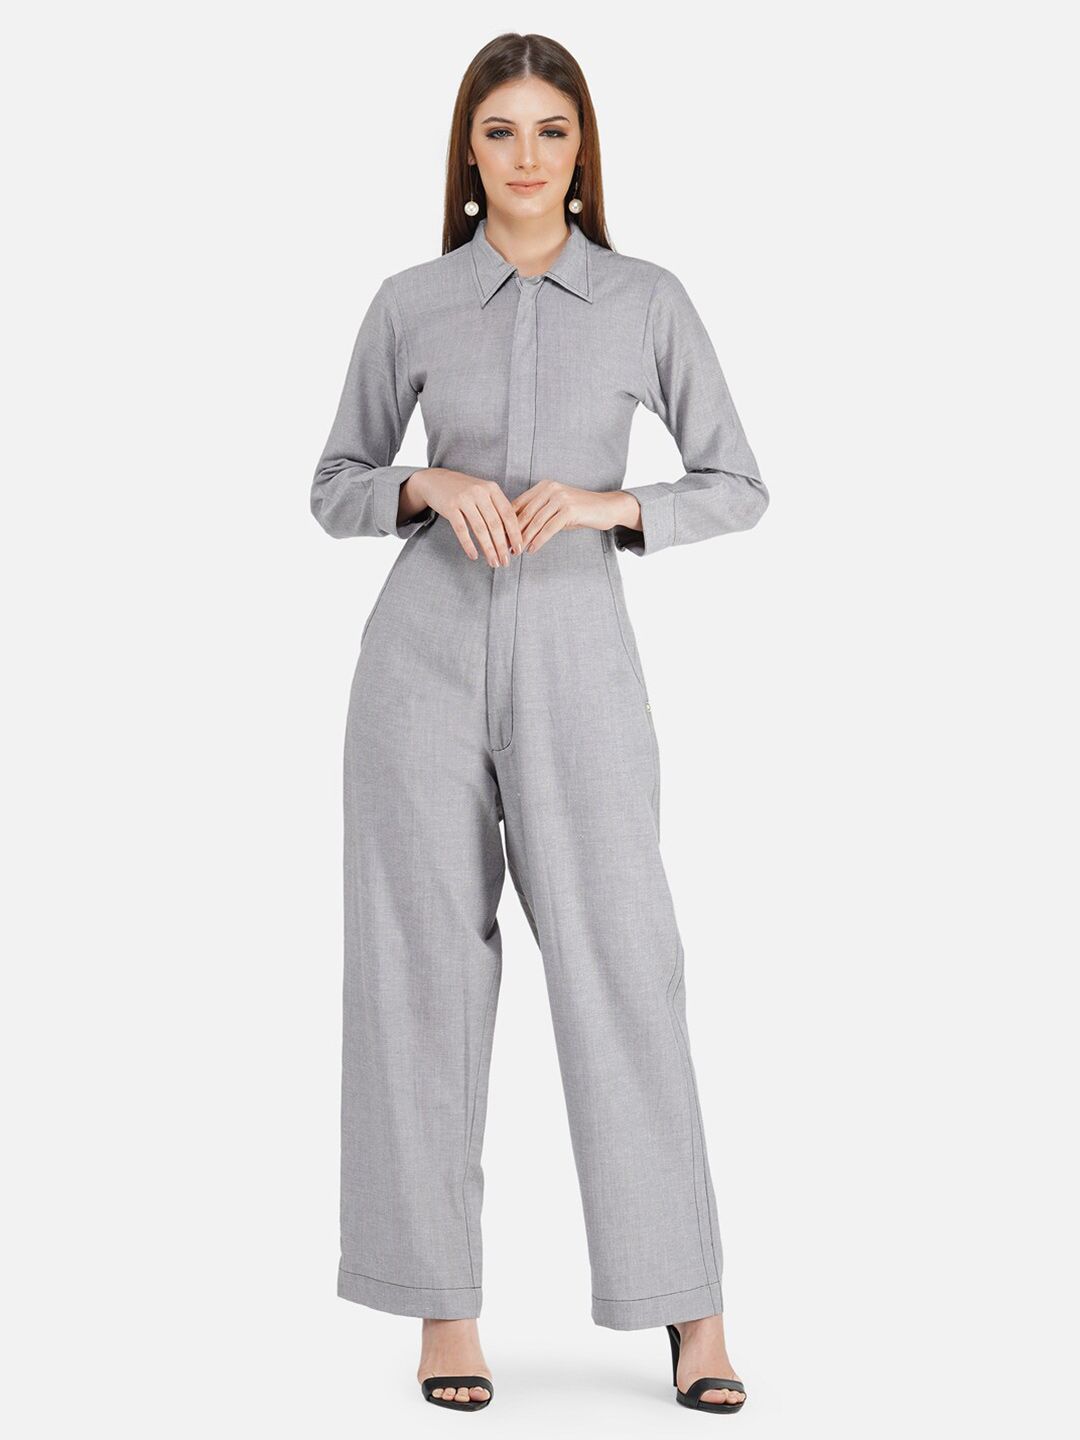 FABNEST Grey Solid Basic Casual Jumpsuit Price in India